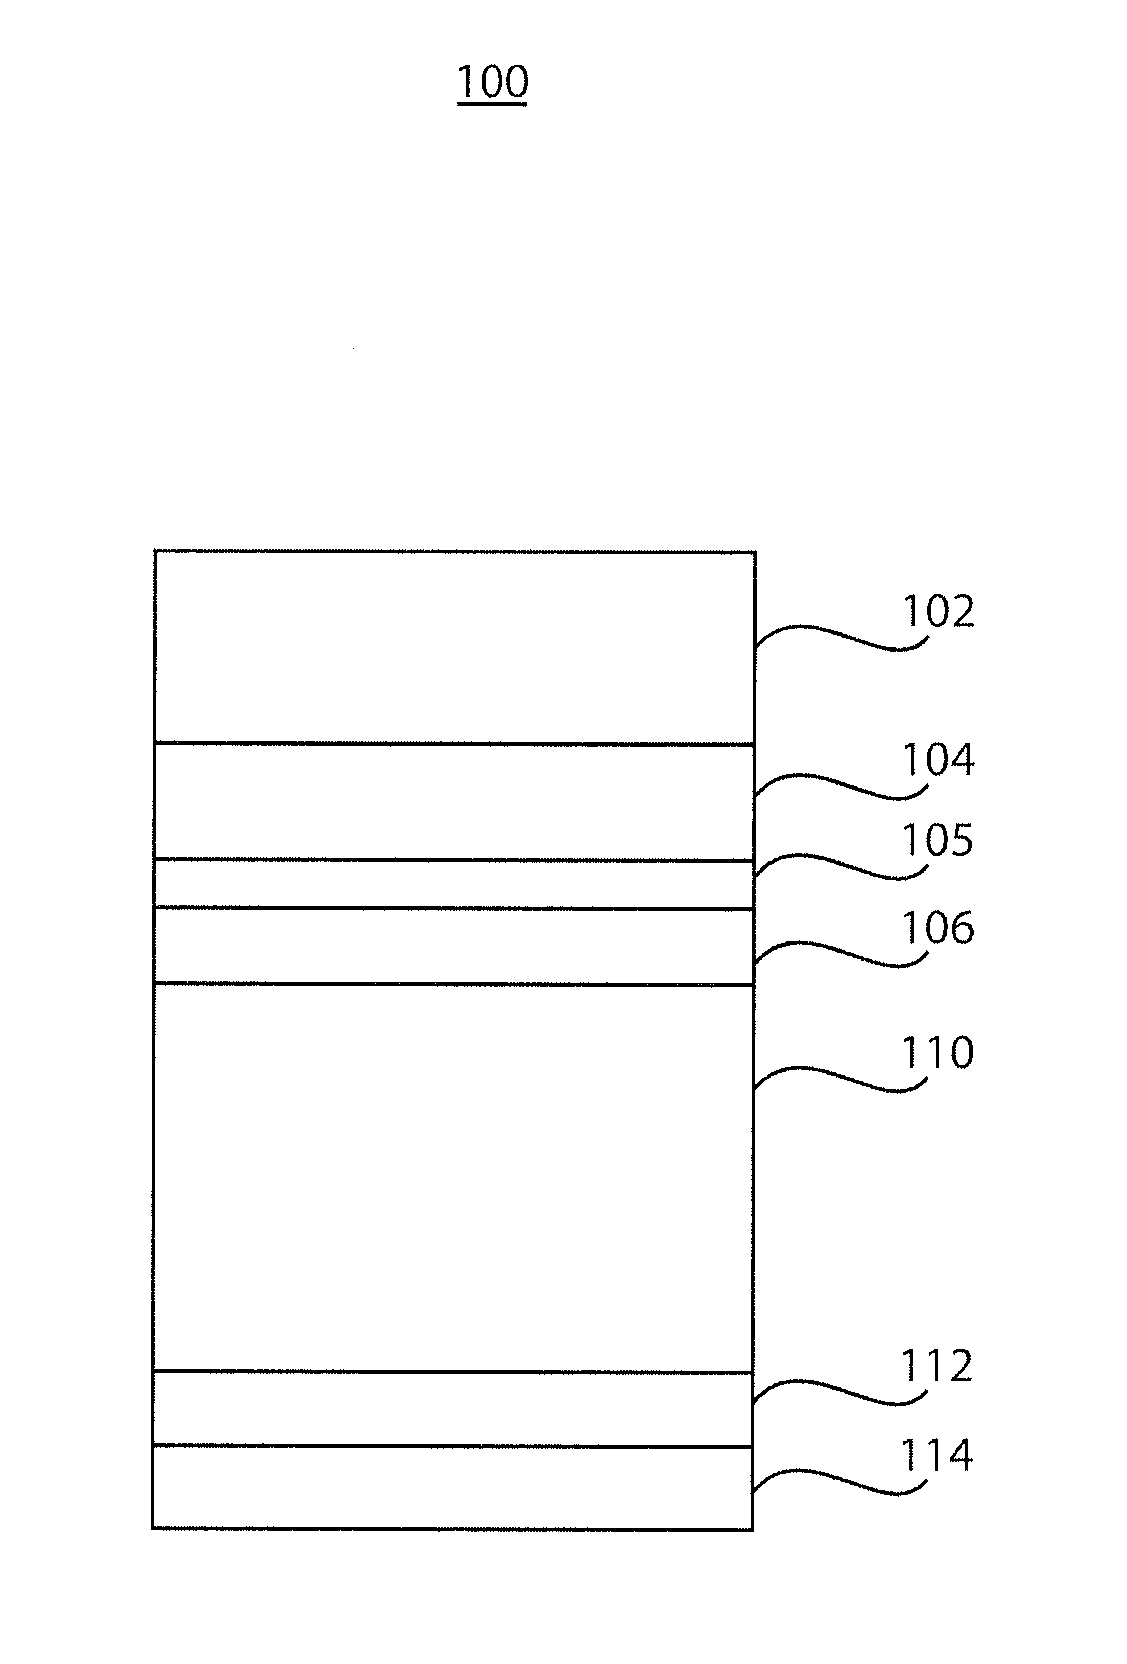 Reduced light degradation due to low power deposition of buffer layer